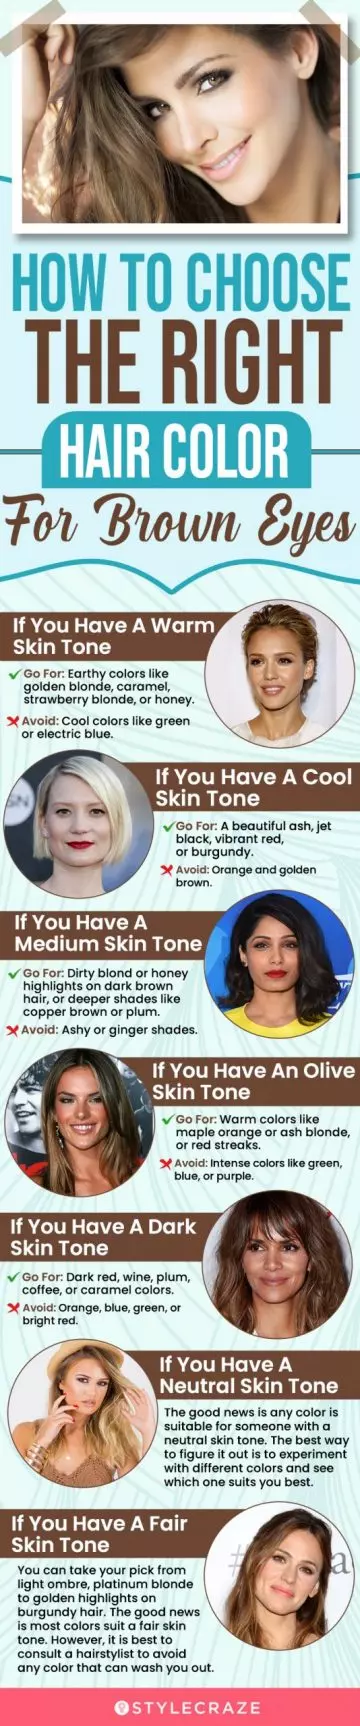 how to choose the right hair colour for brown eye (infographic)